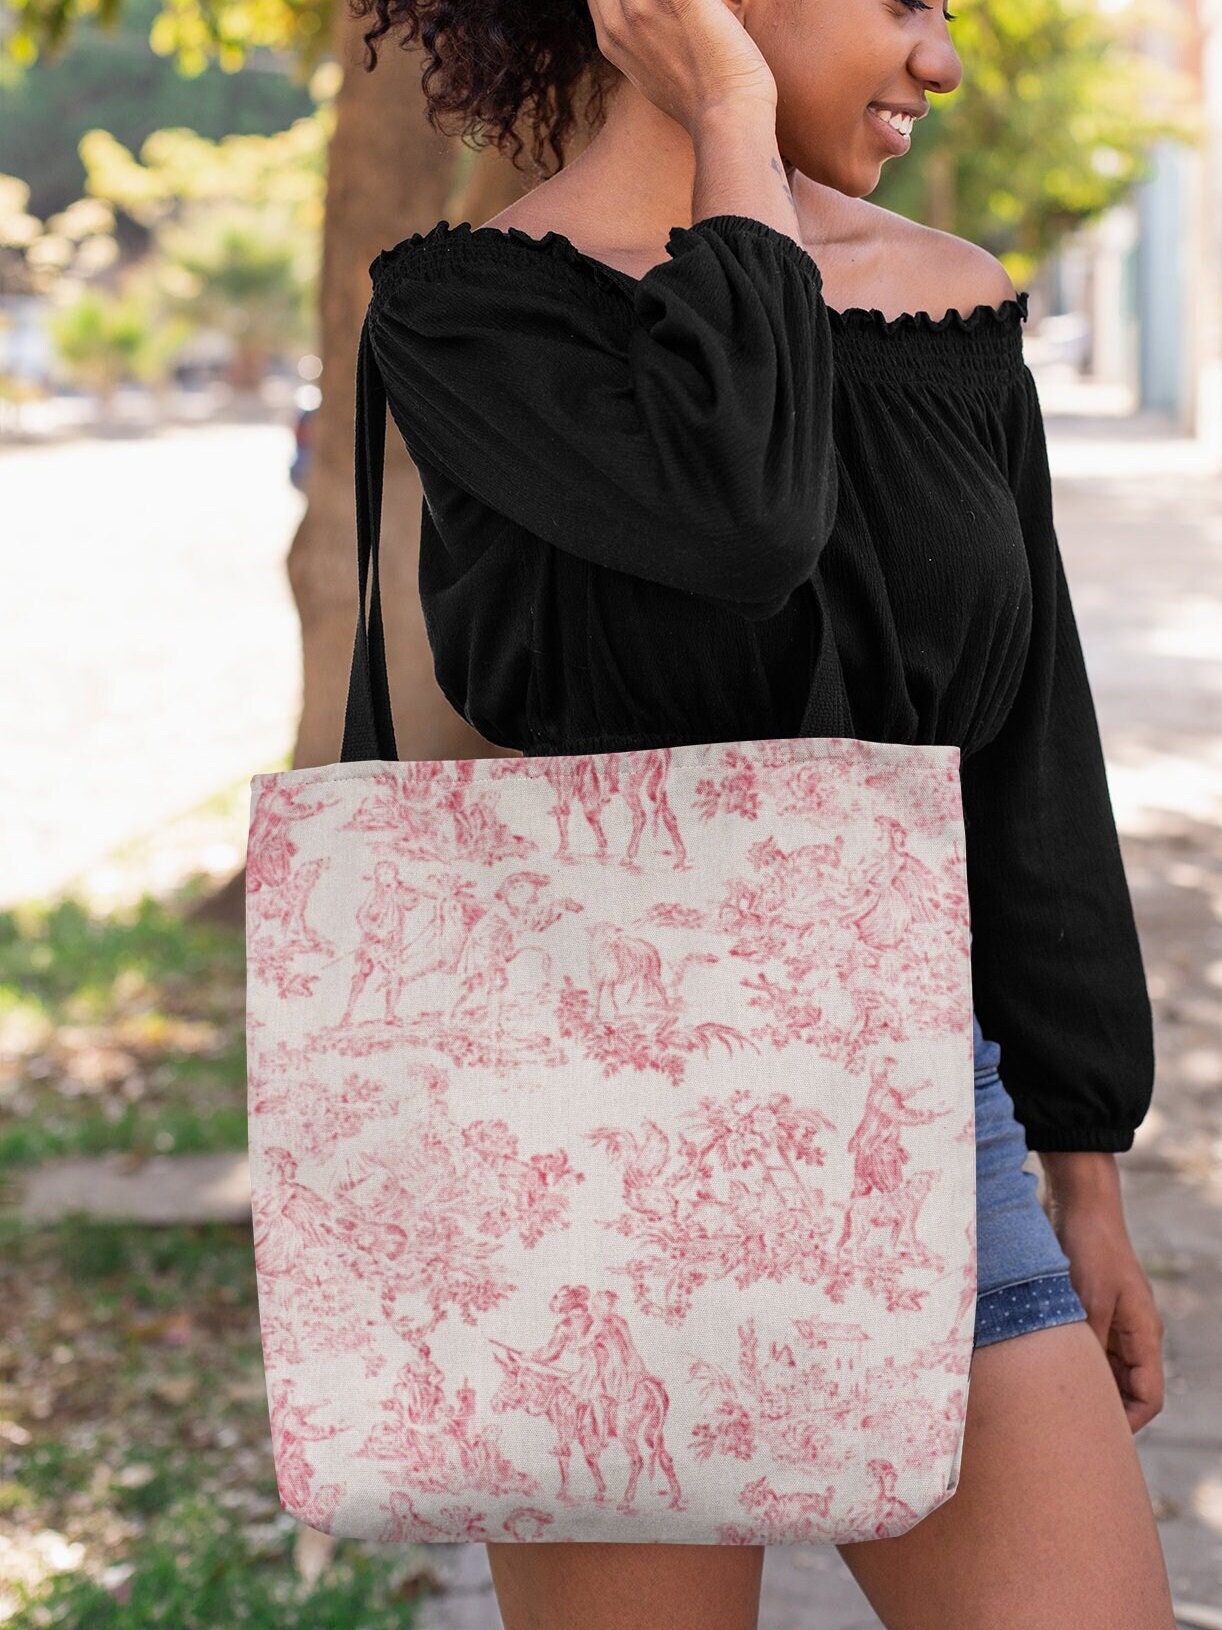 Got it All Pink Toile Print Tote Bag